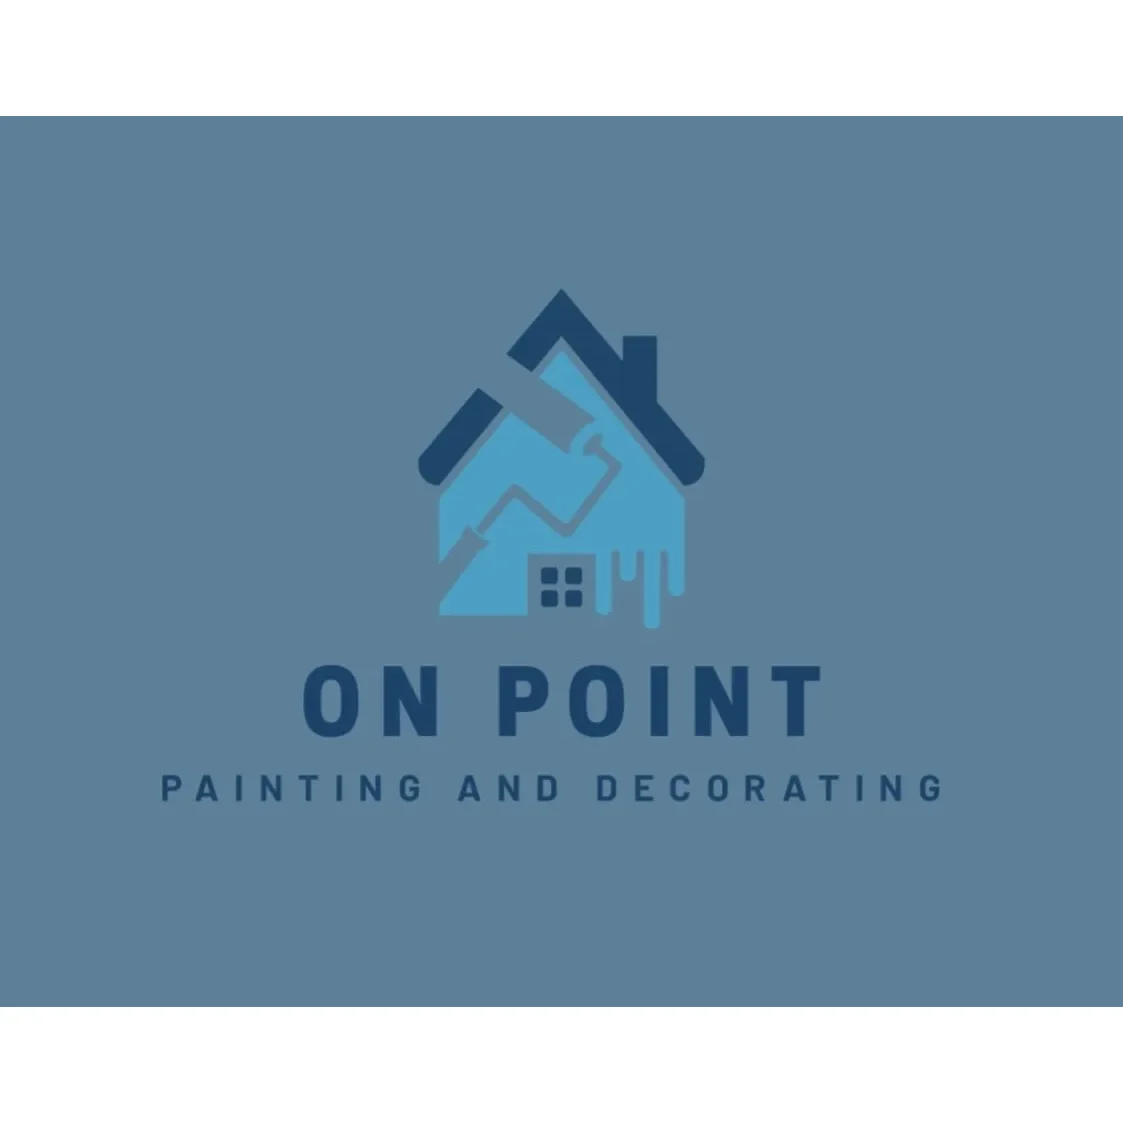 On Point Painting And Decorating Ltd - Thornton-Cleveleys, Lancashire - 07368 321260 | ShowMeLocal.com